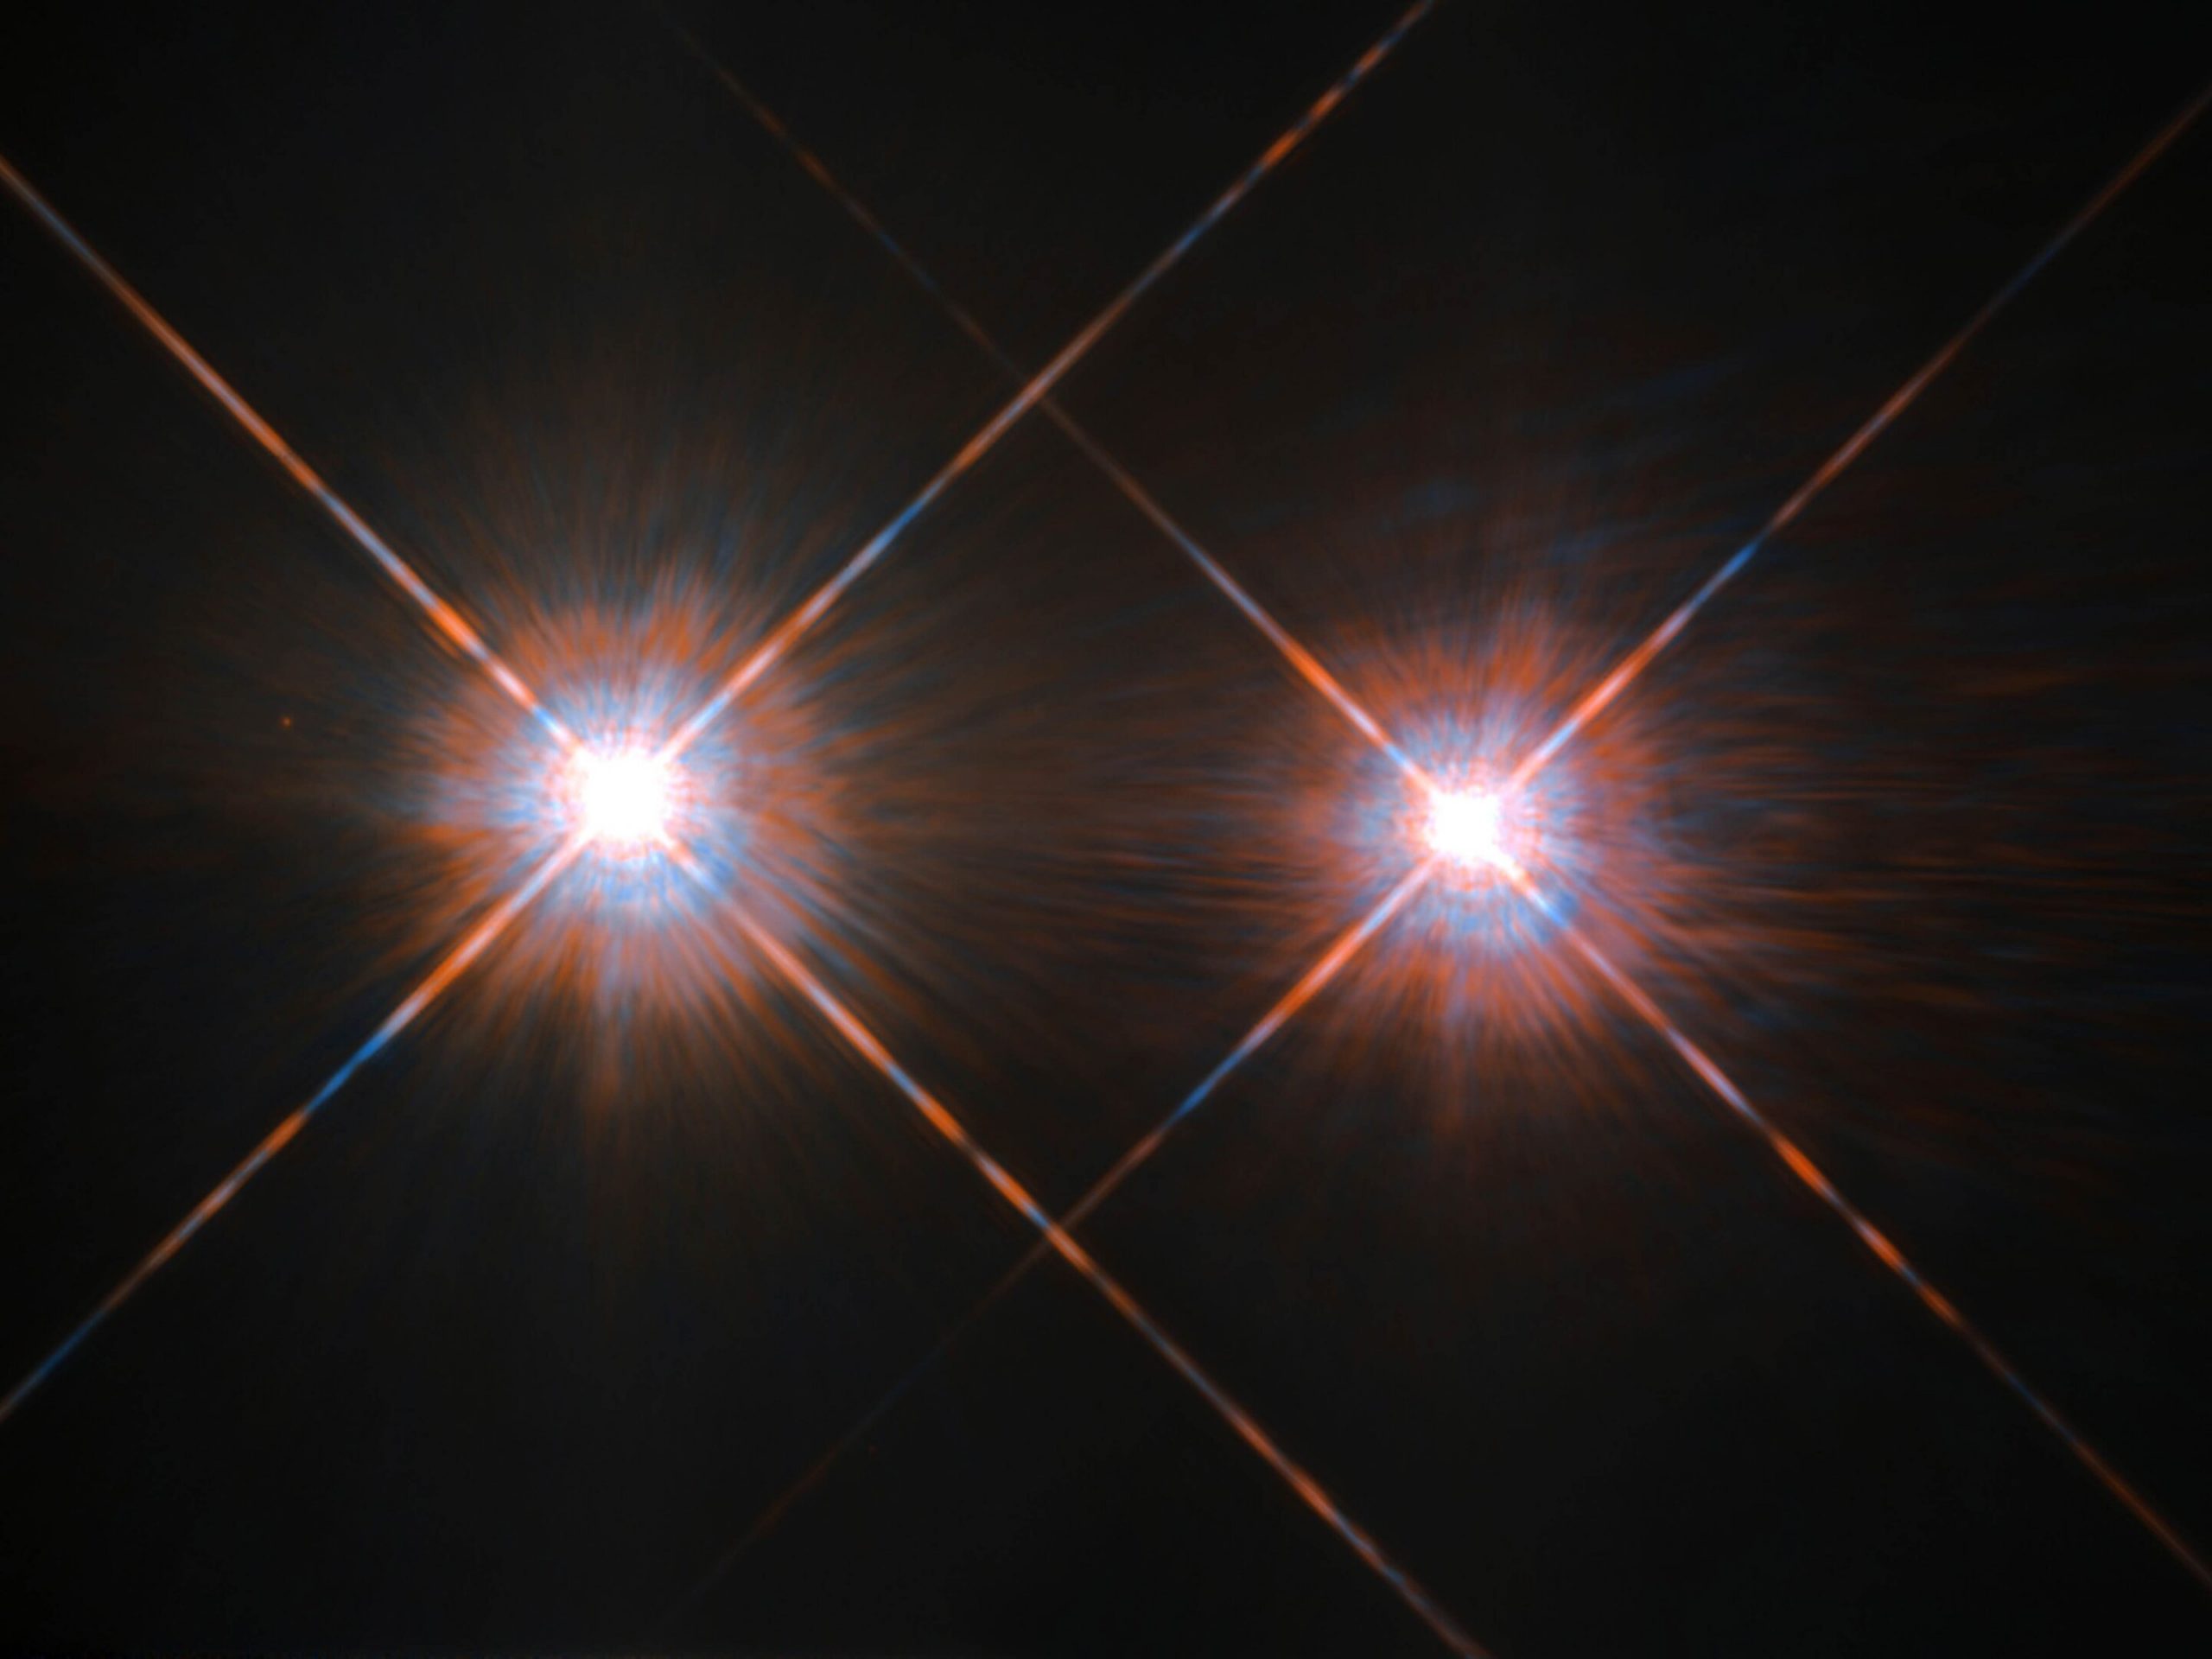 The Alpha Centauri system as seen by the Hubble Space Telescope. Credit: NASA